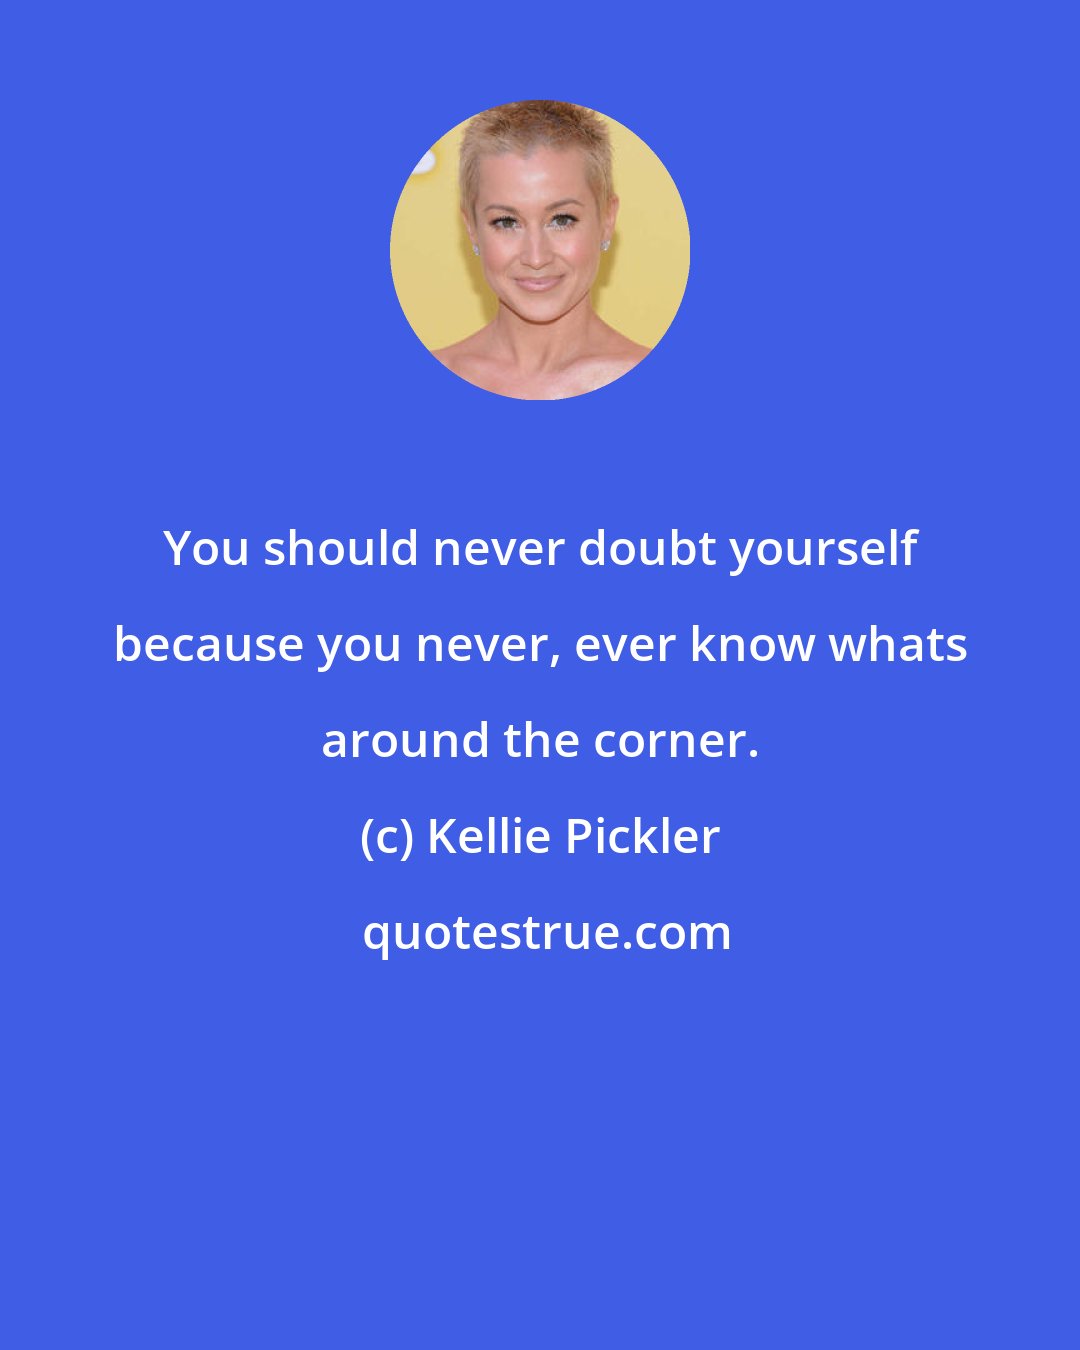 Kellie Pickler: You should never doubt yourself because you never, ever know whats around the corner.